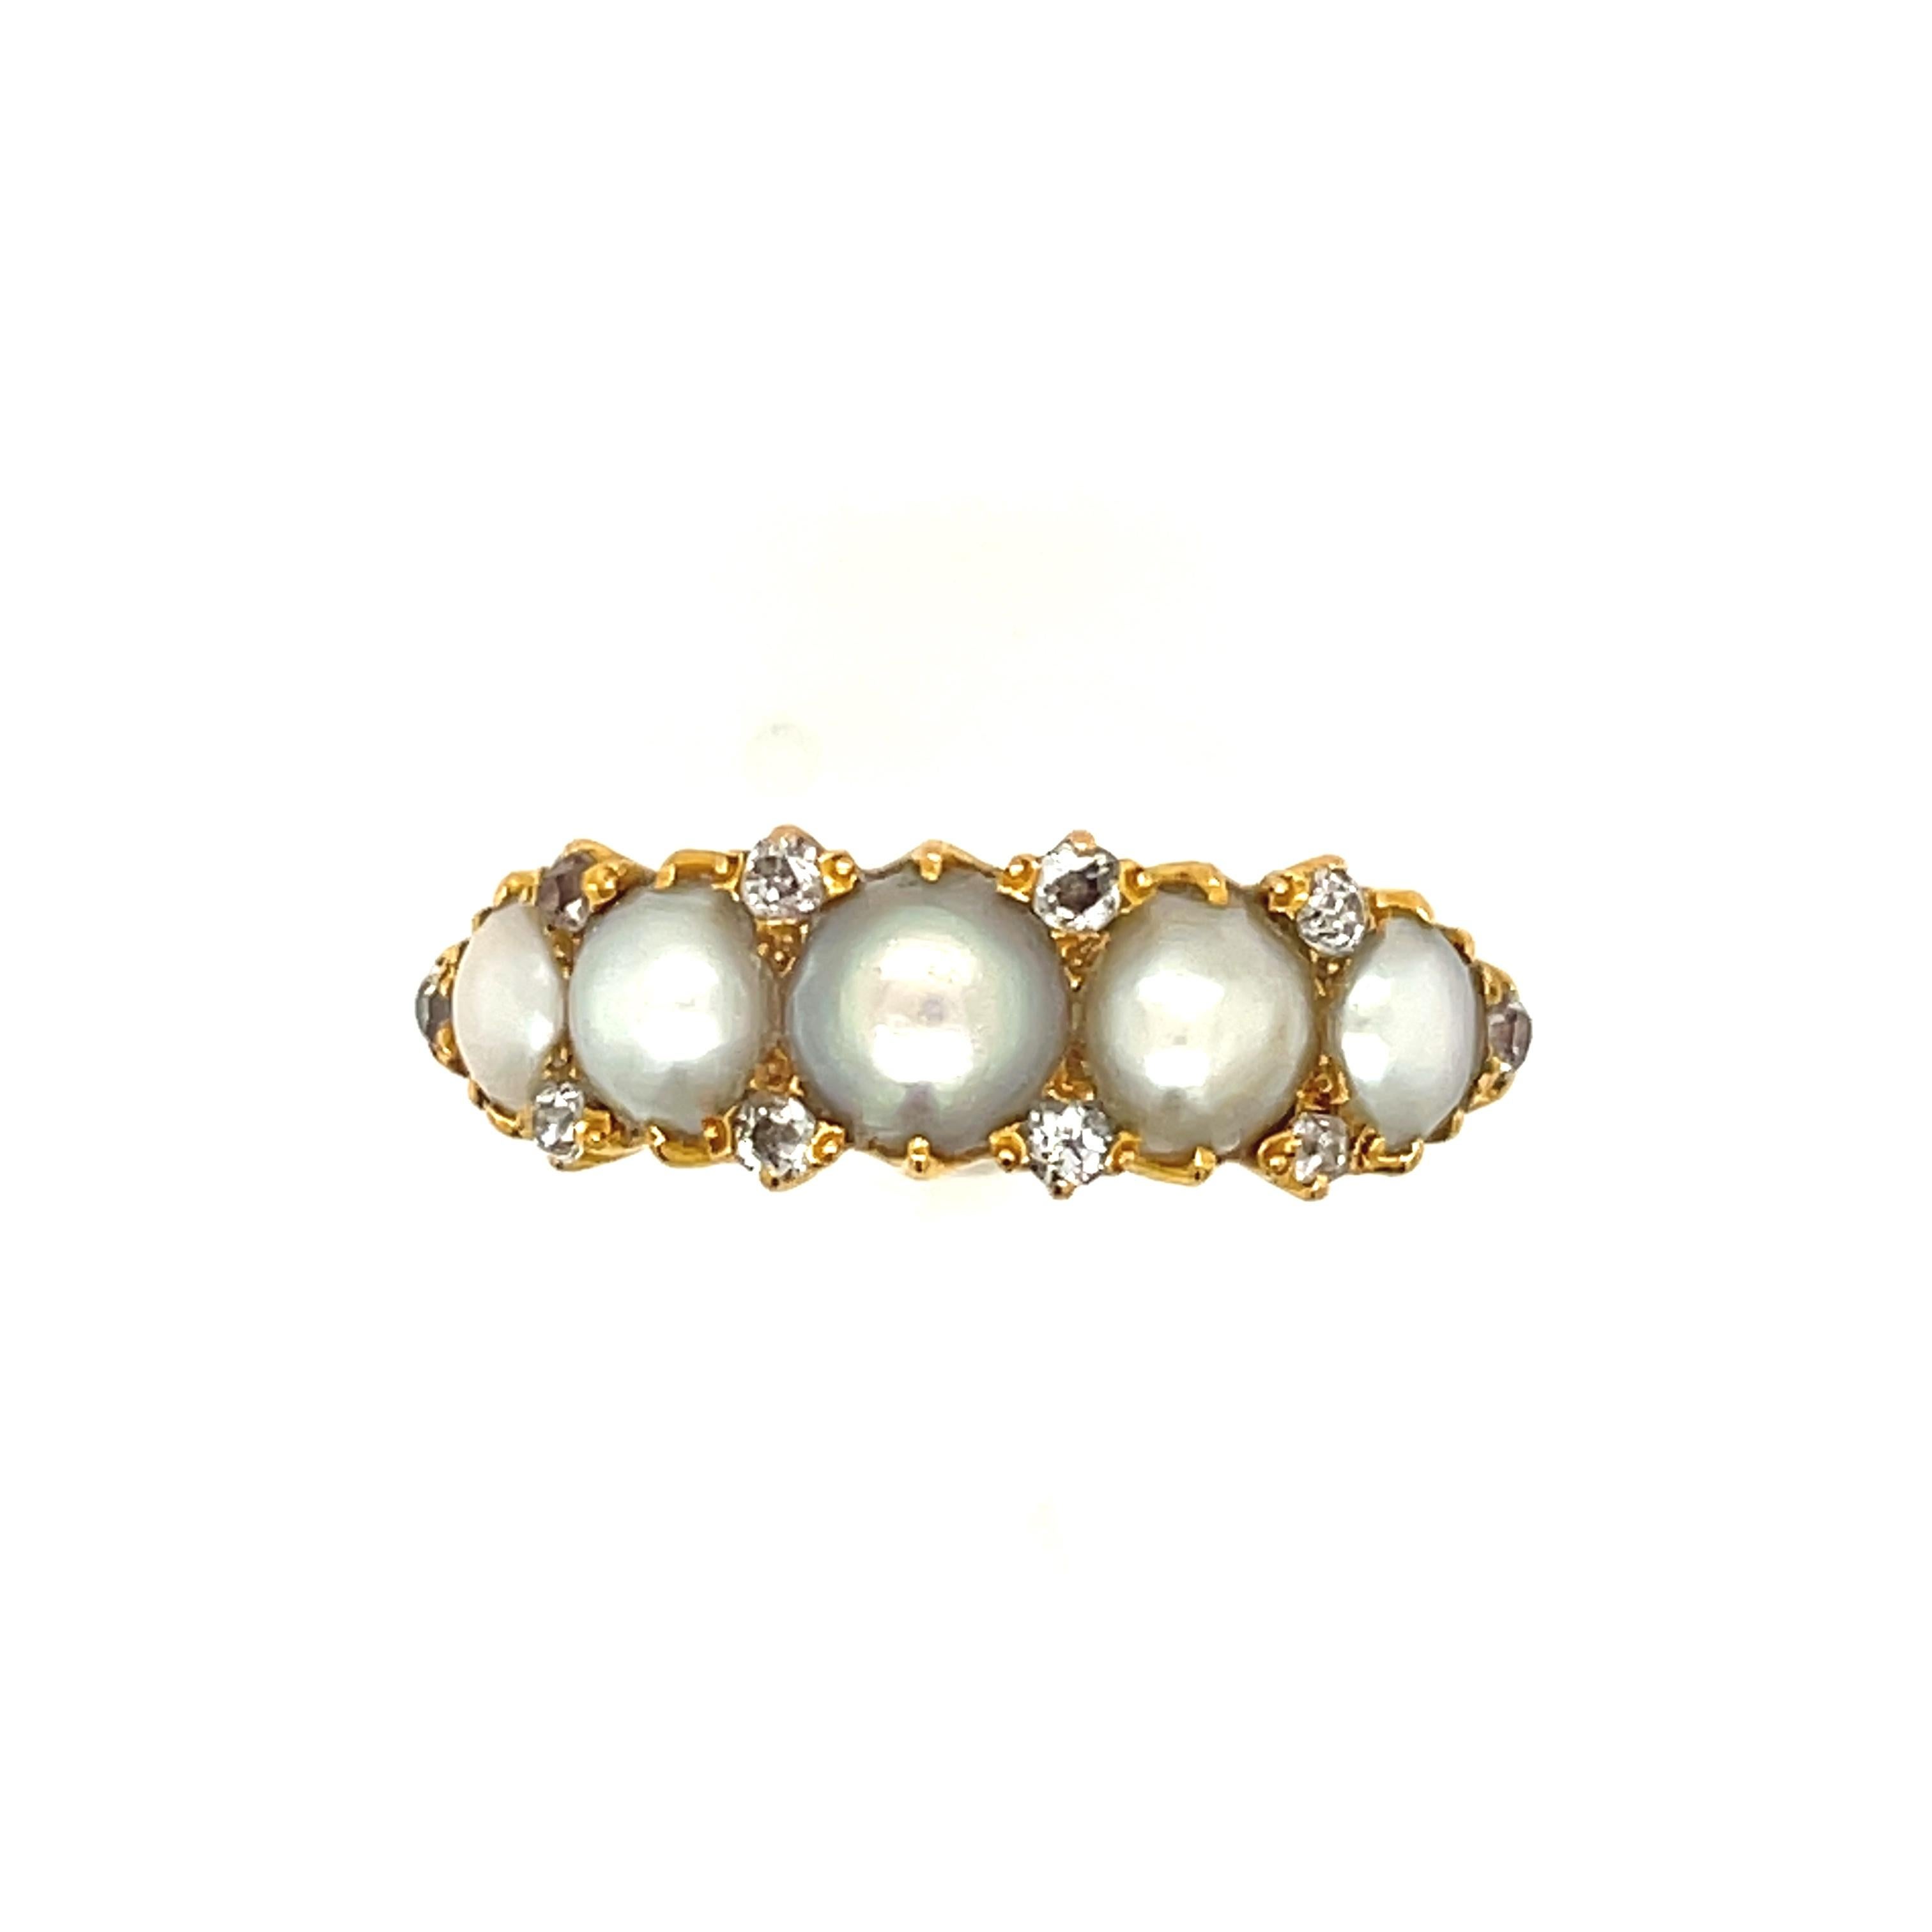 A wide antique Victorian five pearl half hoop ring accented by diamonds circa 1880. The pearls are likely natural and are split to create the ring. The pearls have a nice creamy white lustre with perhaps a slight tinge of gray. The 10 diamonds are